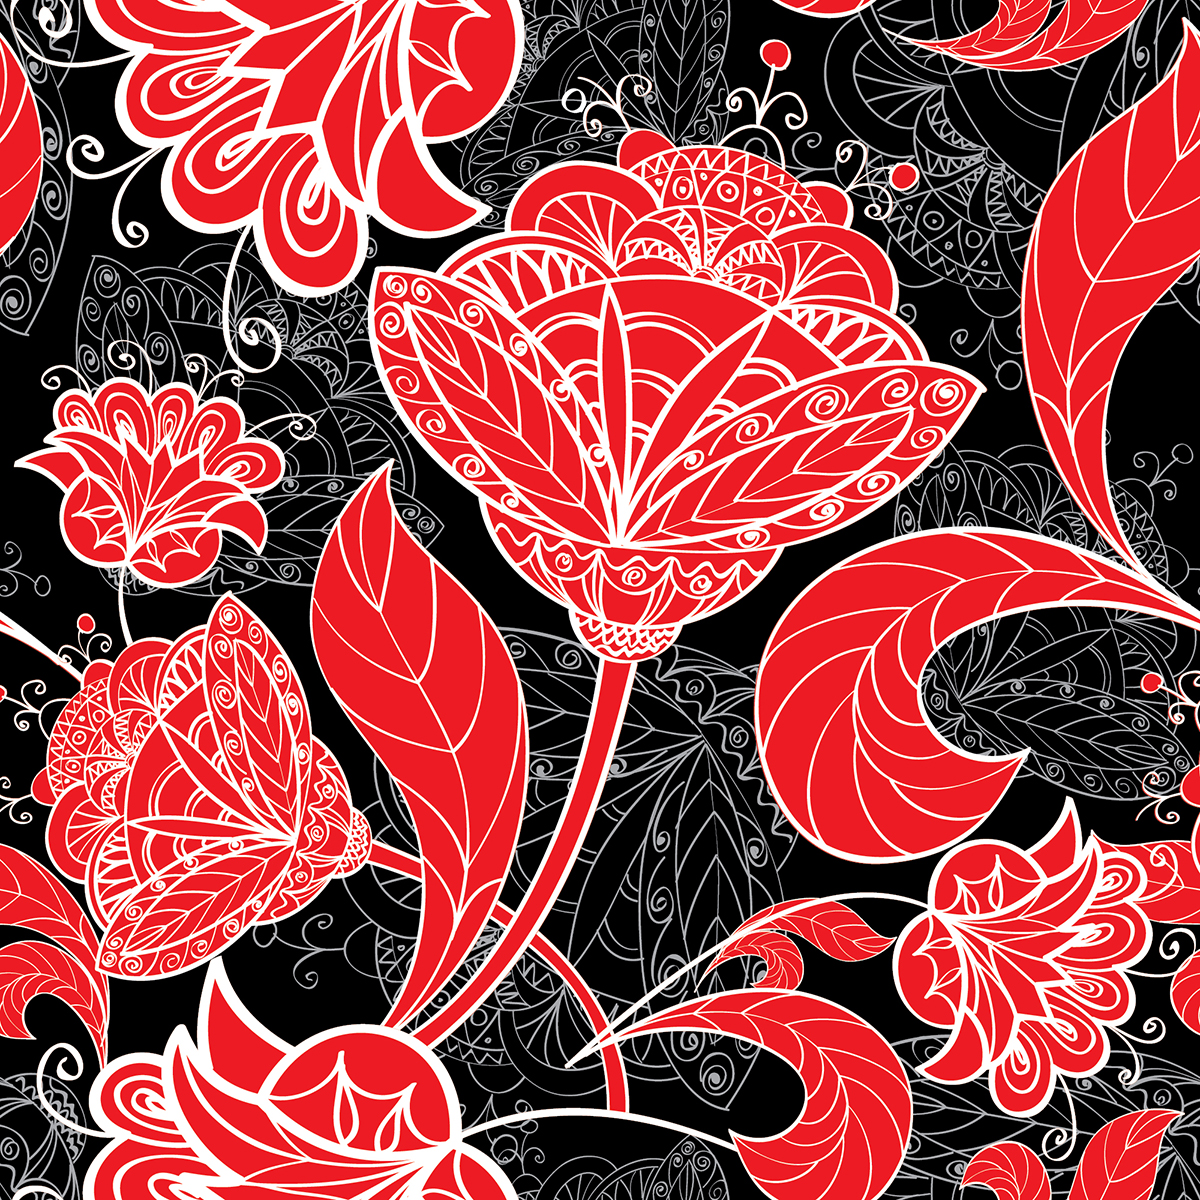 A red and white floral pattern